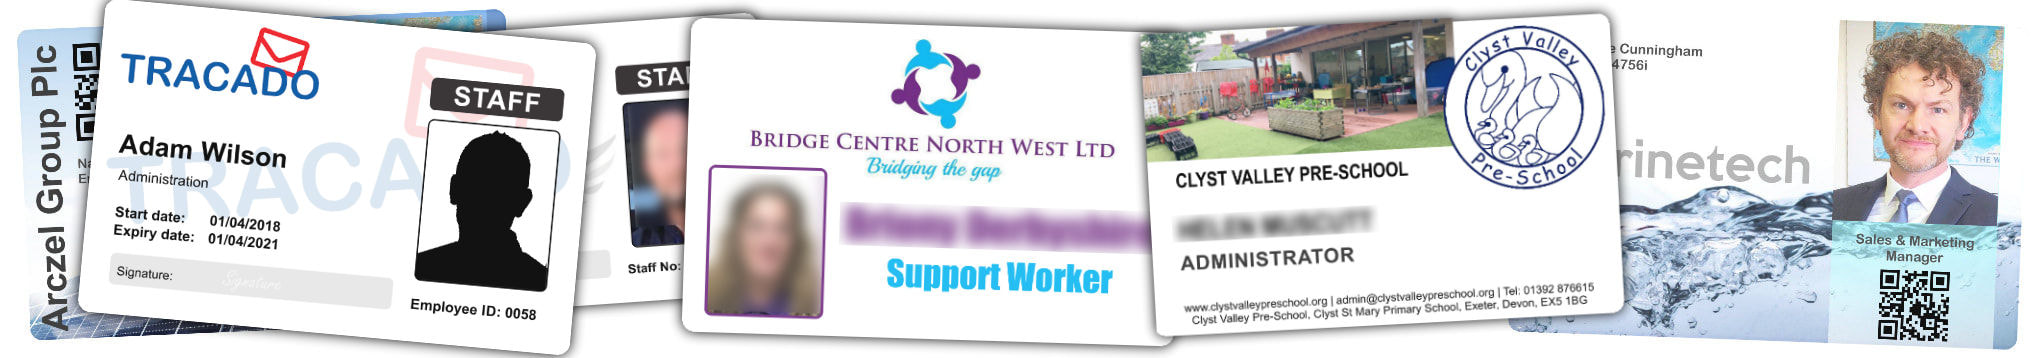 Hastings examples of staff photo ID cards | samples of employee Identity card printing | Workers ID cards printed in 